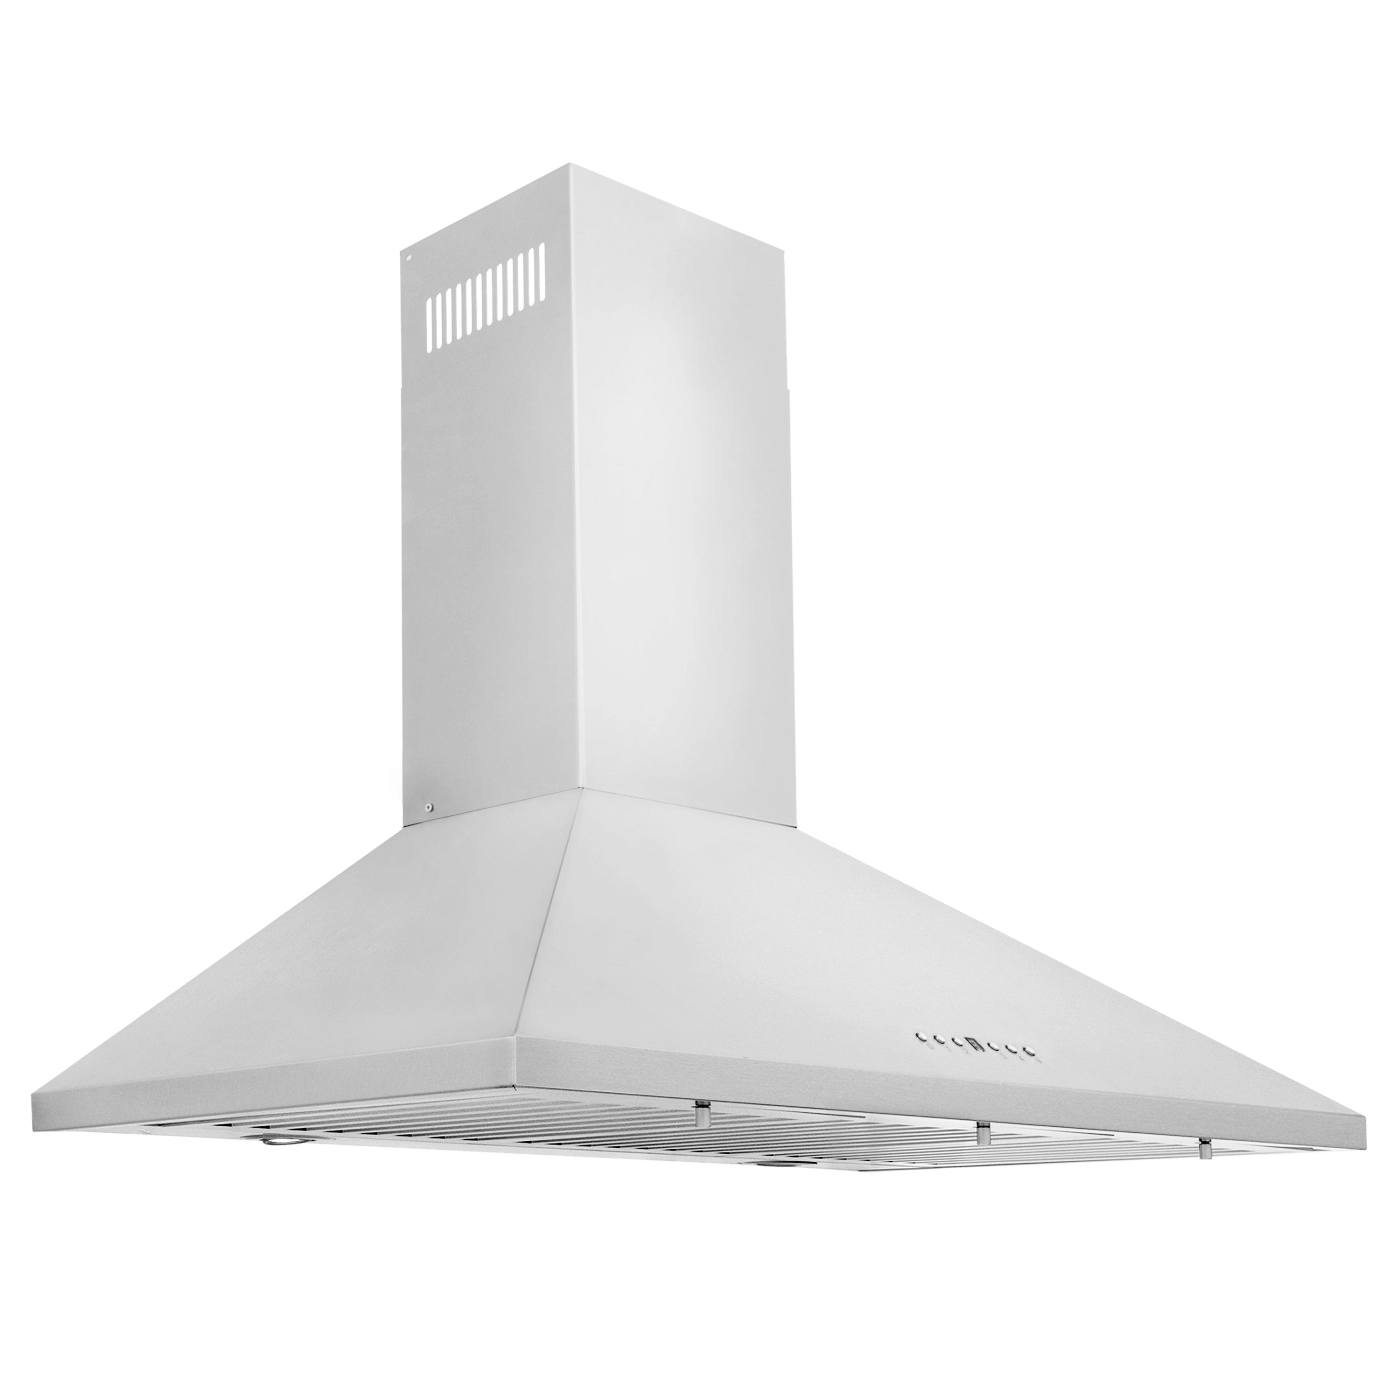 ZLINE Convertible Vent Wall Mount Range Hood in Stainless Steel (KL2) - white background